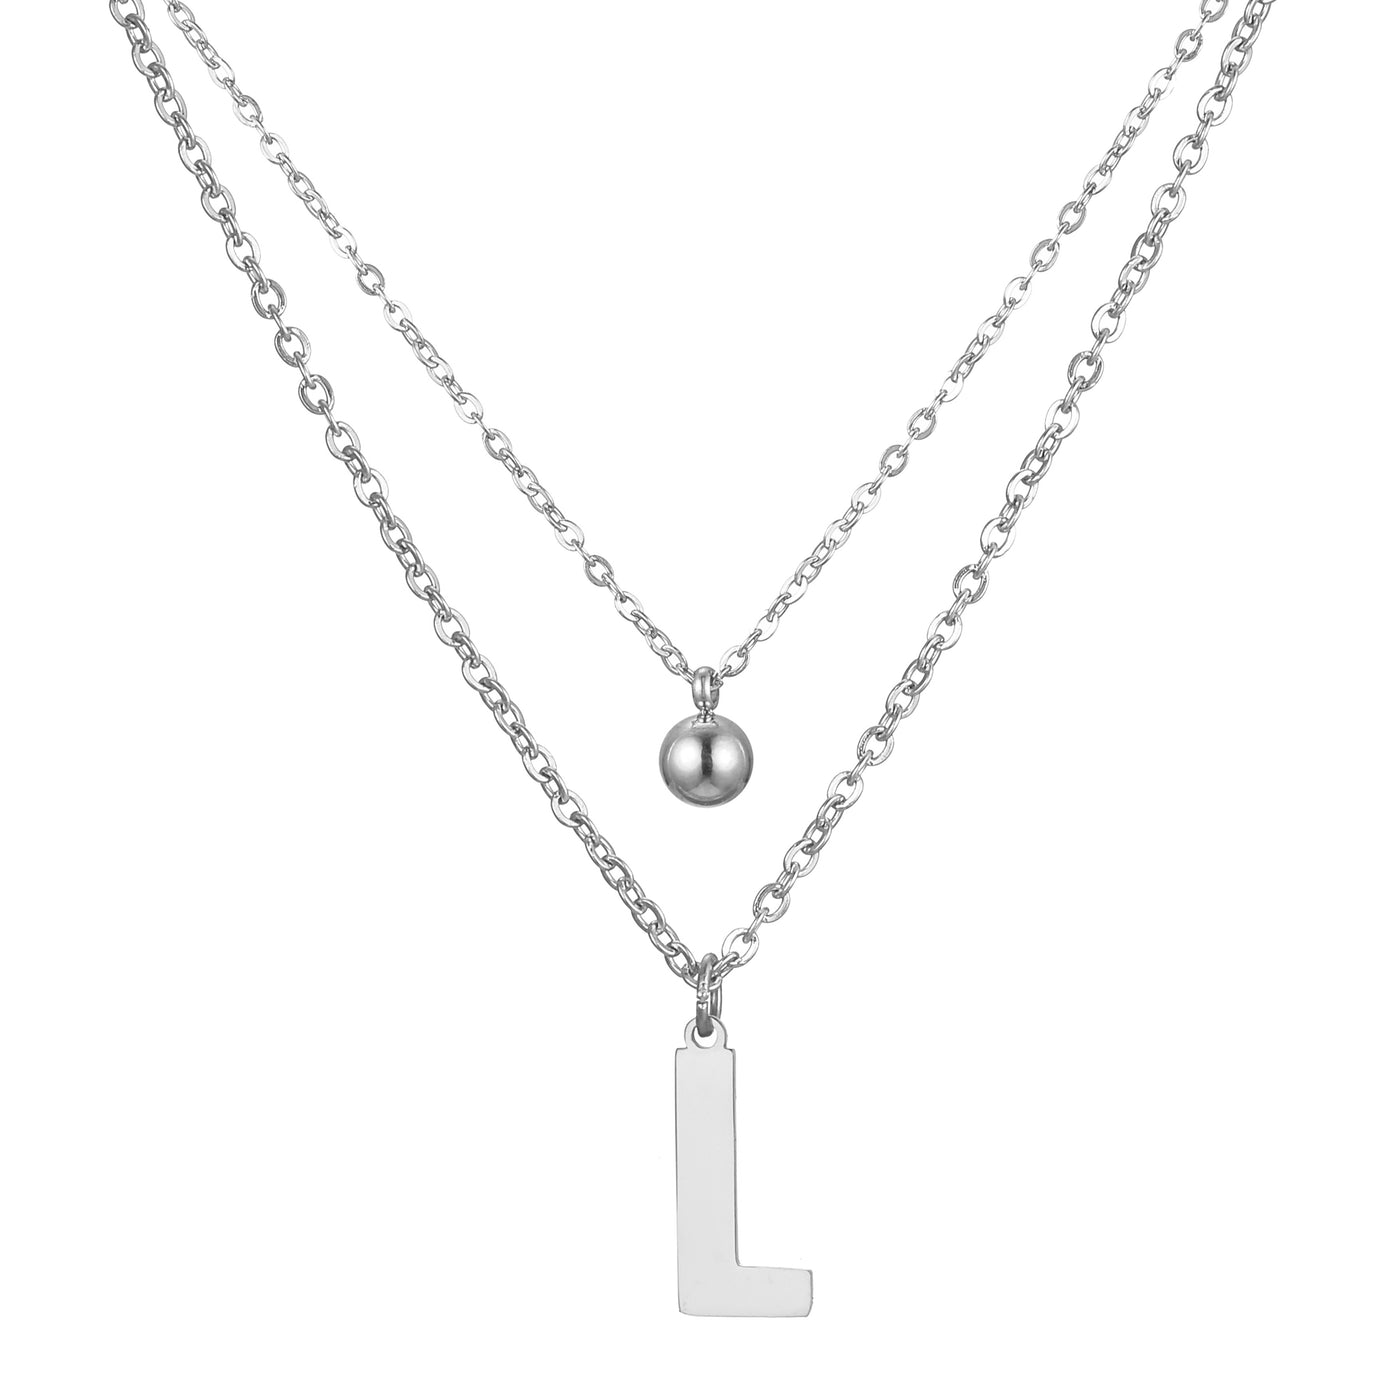 Layer Necklace with Letter